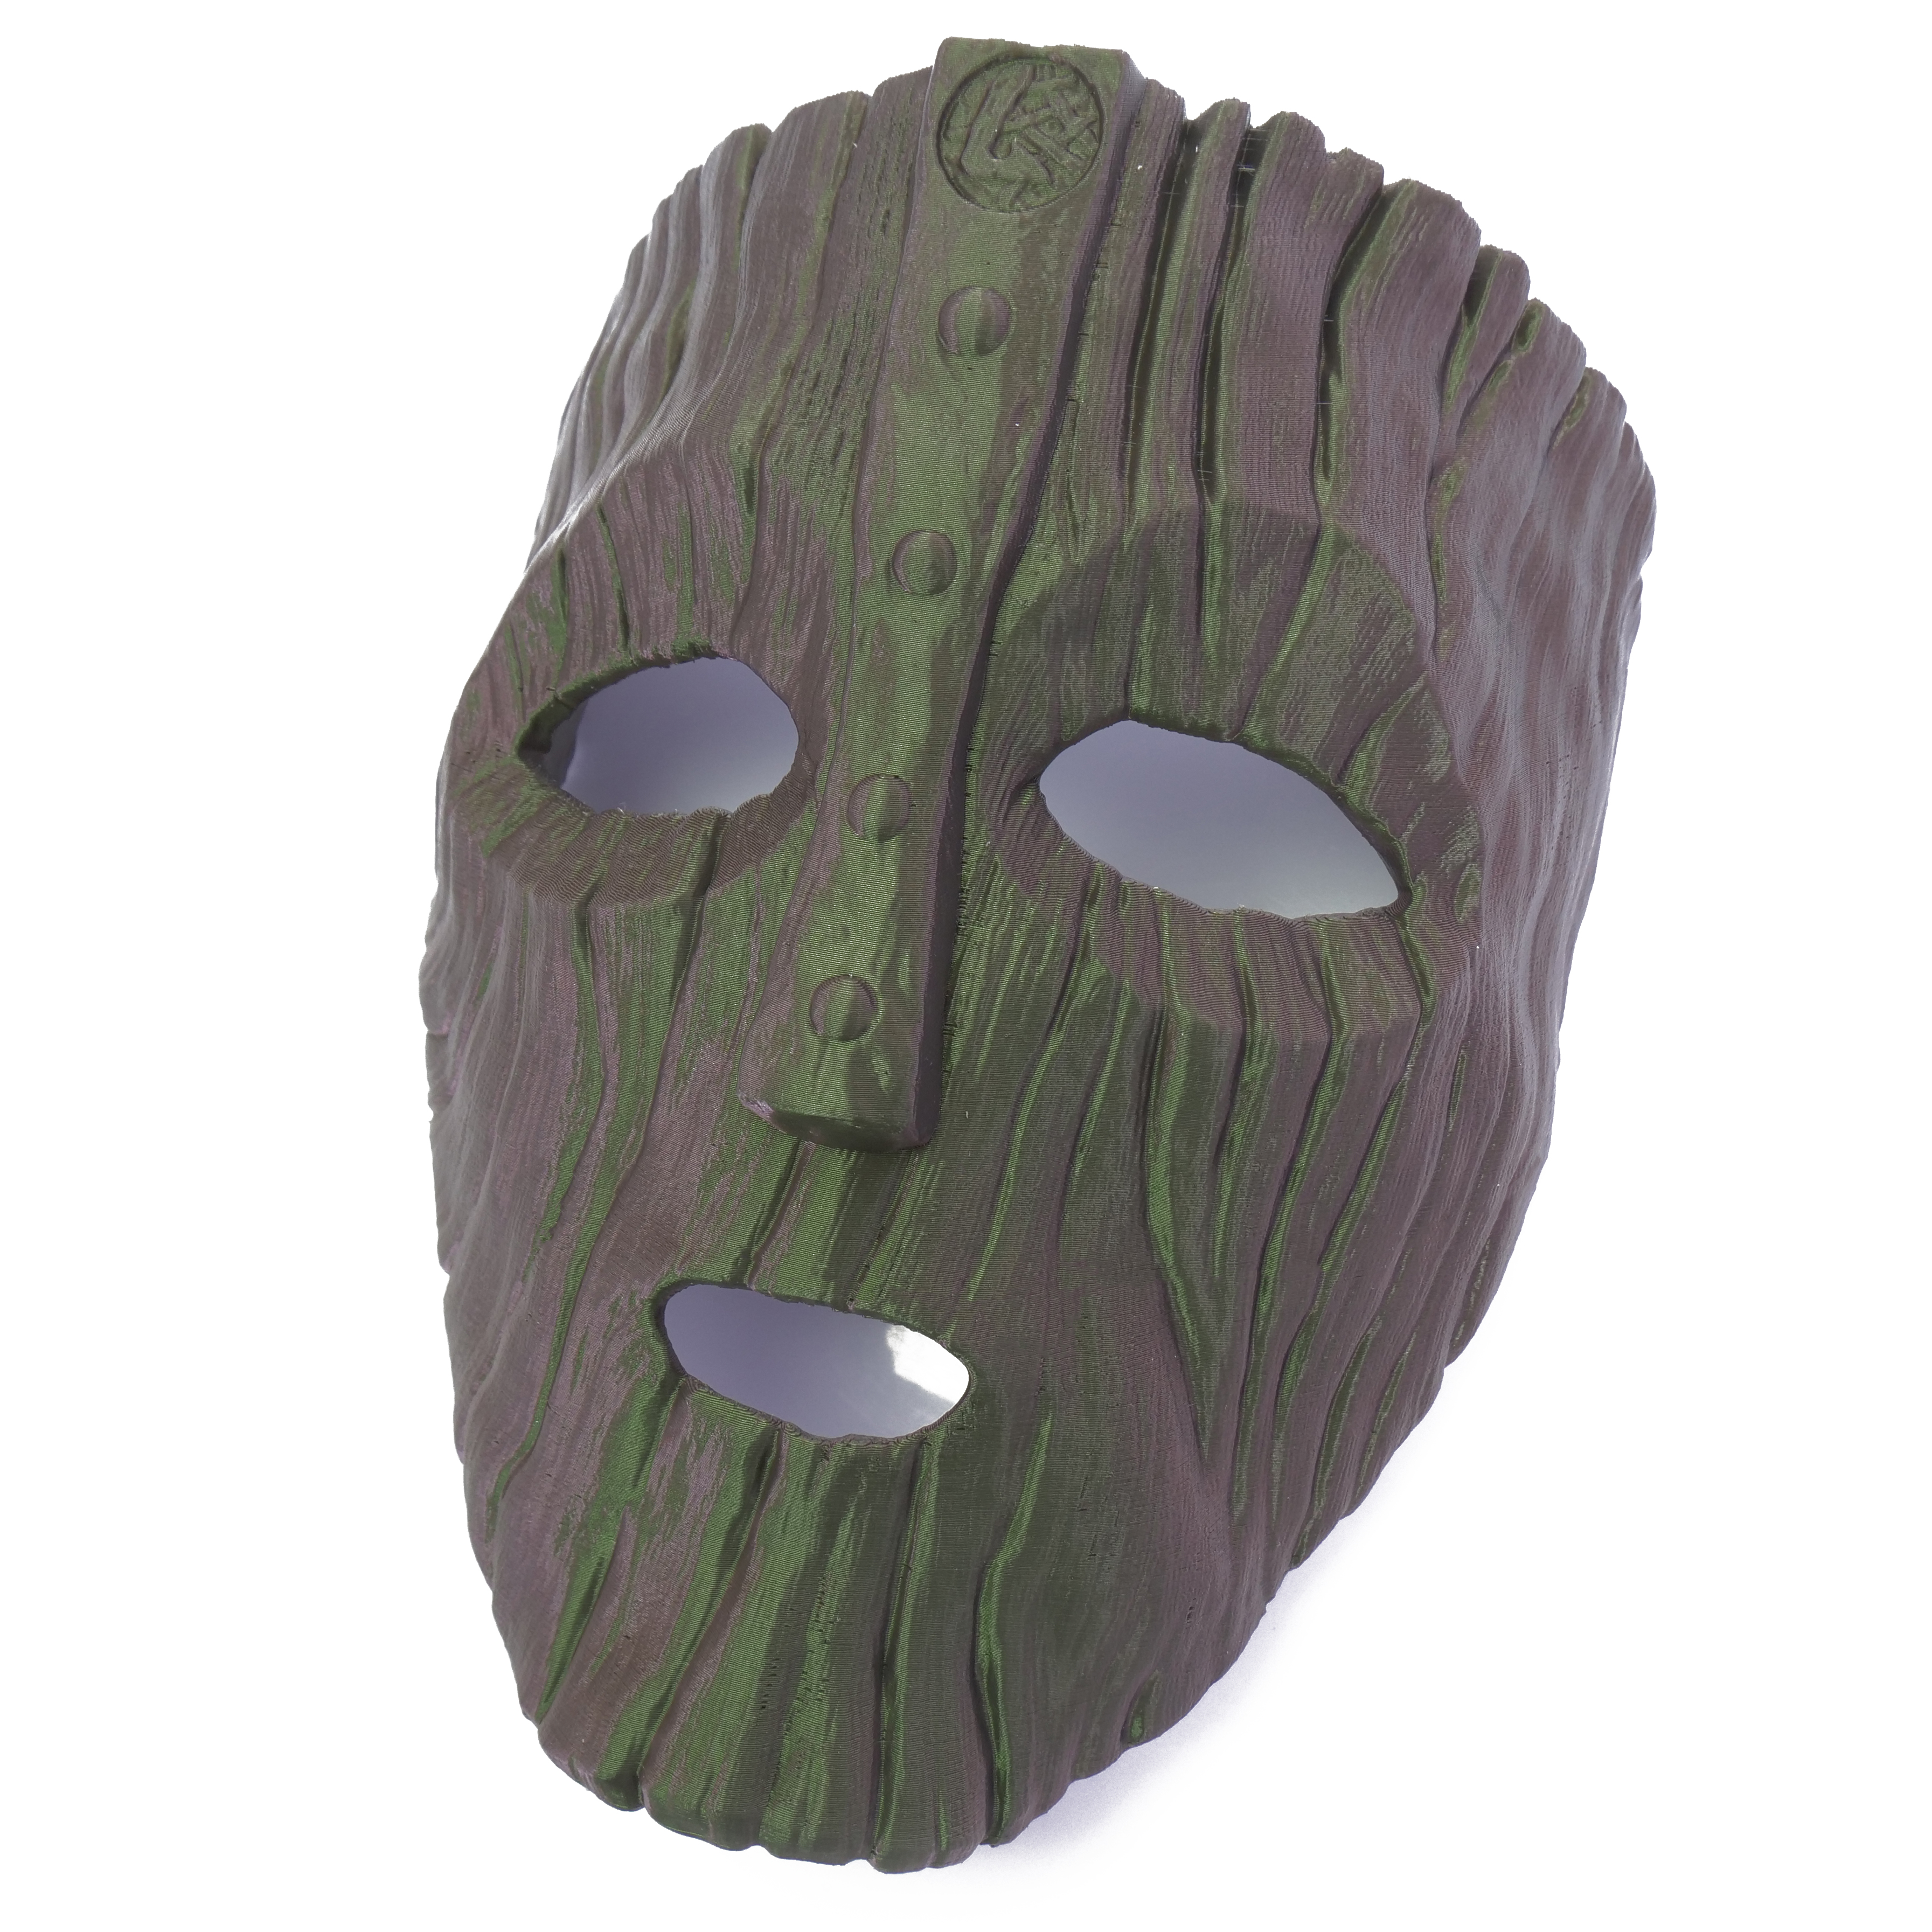 3d print of green mask from the movie mask